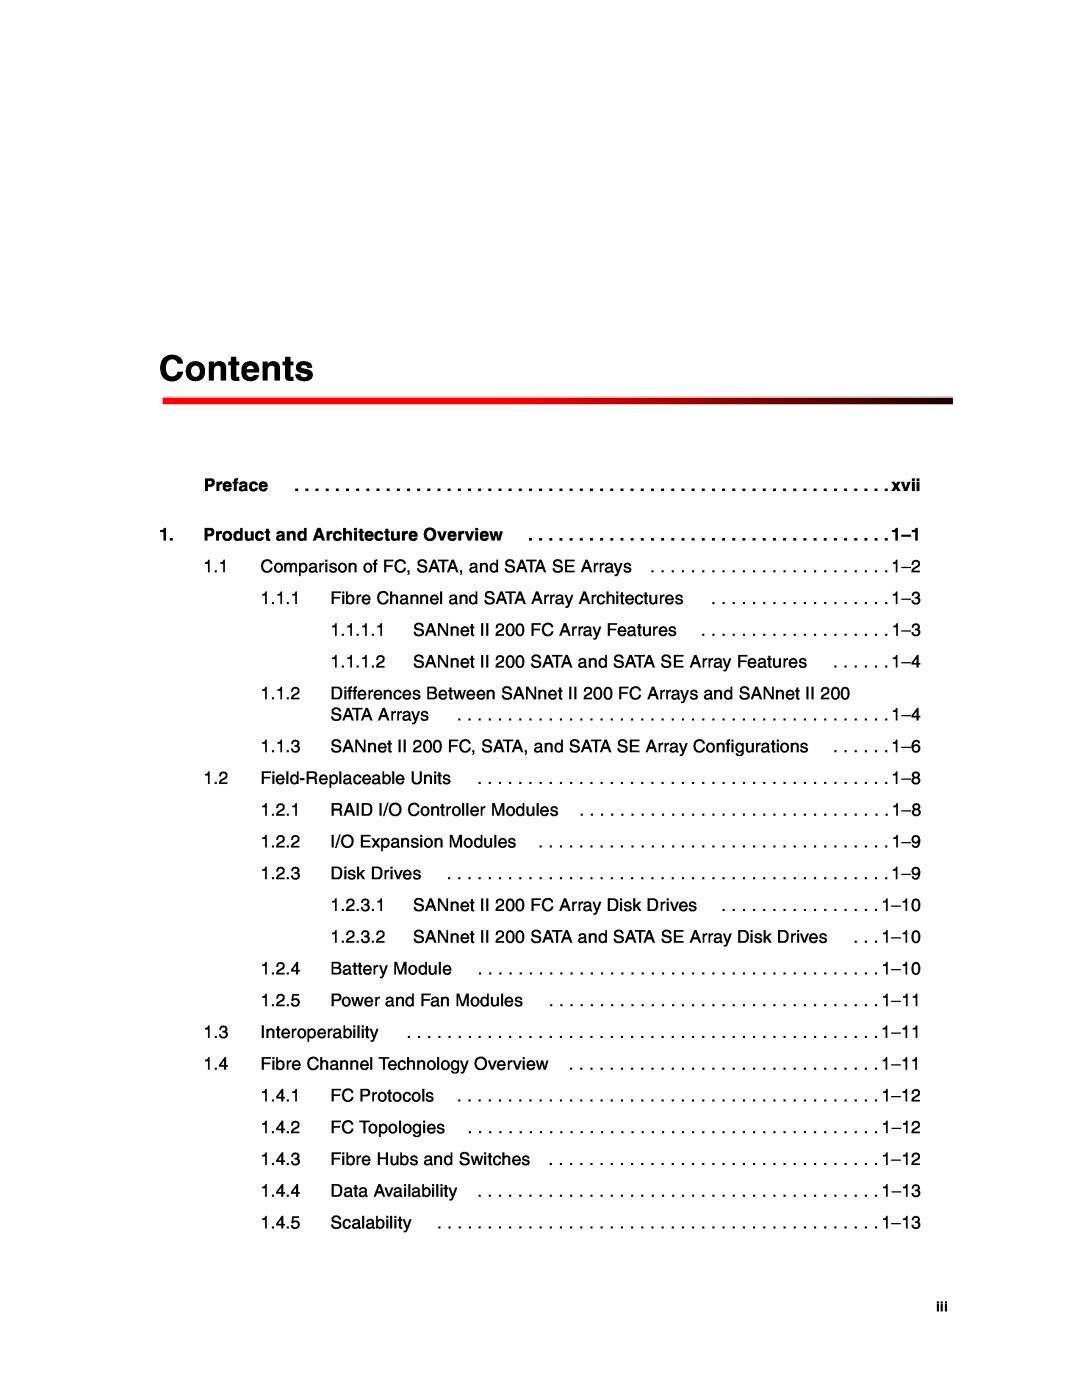 Dot Hill Systems II 200 FC service manual Contents, Preface, xvii, Product and Architecture Overview 